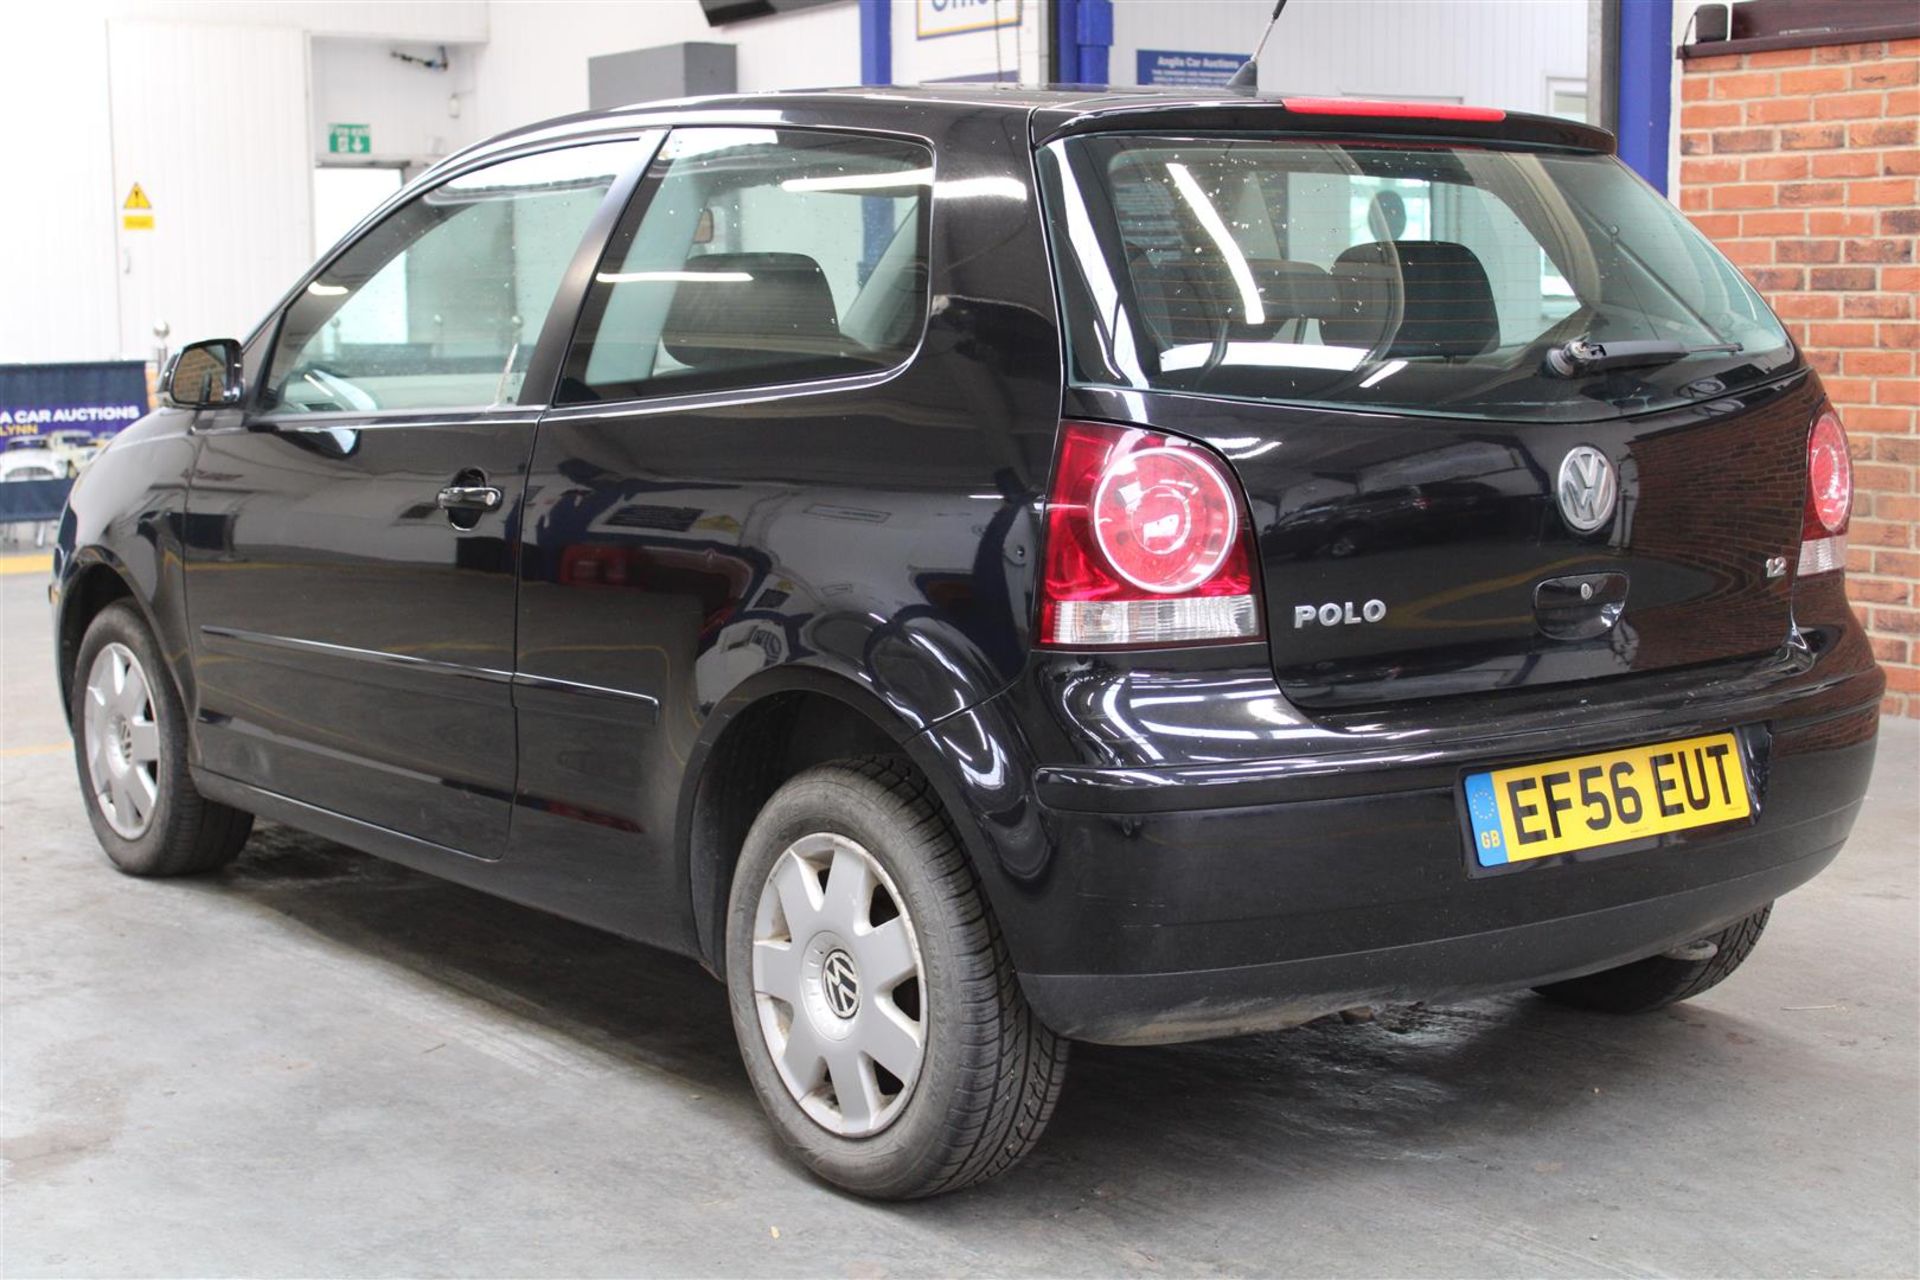 56 06 VW Polo S 64 - Image 30 of 31